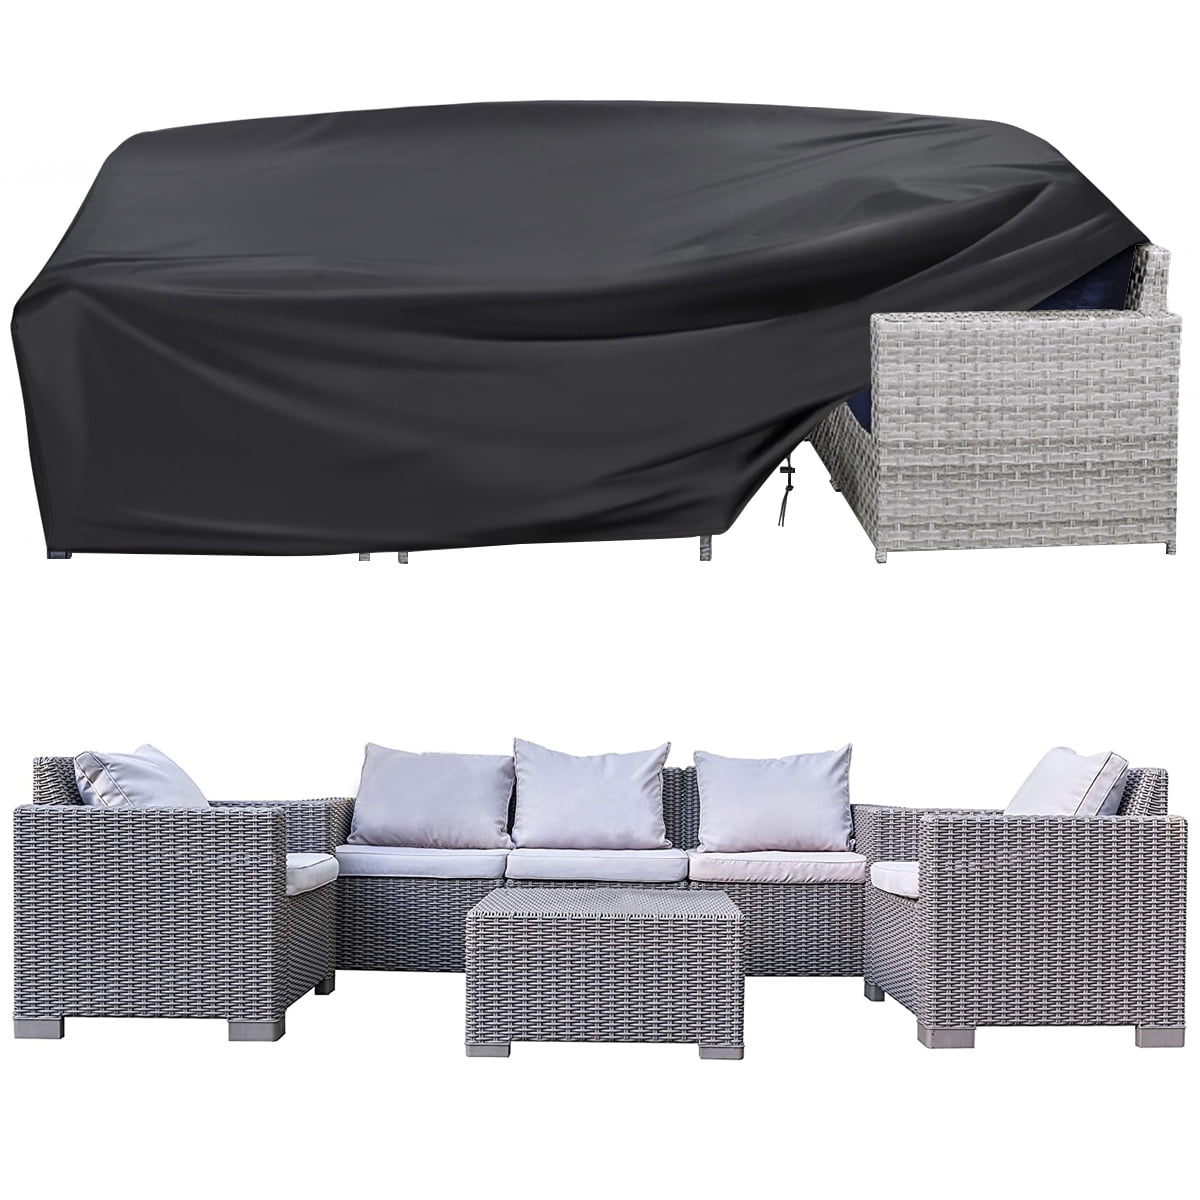 king do way Patio Furniture Covers 110x 80x 41 Patio Table Covers Rectangular Covers with 4 Windproof Buckles No Tears Anti UV No Fading 600D, 110x 80x 41 